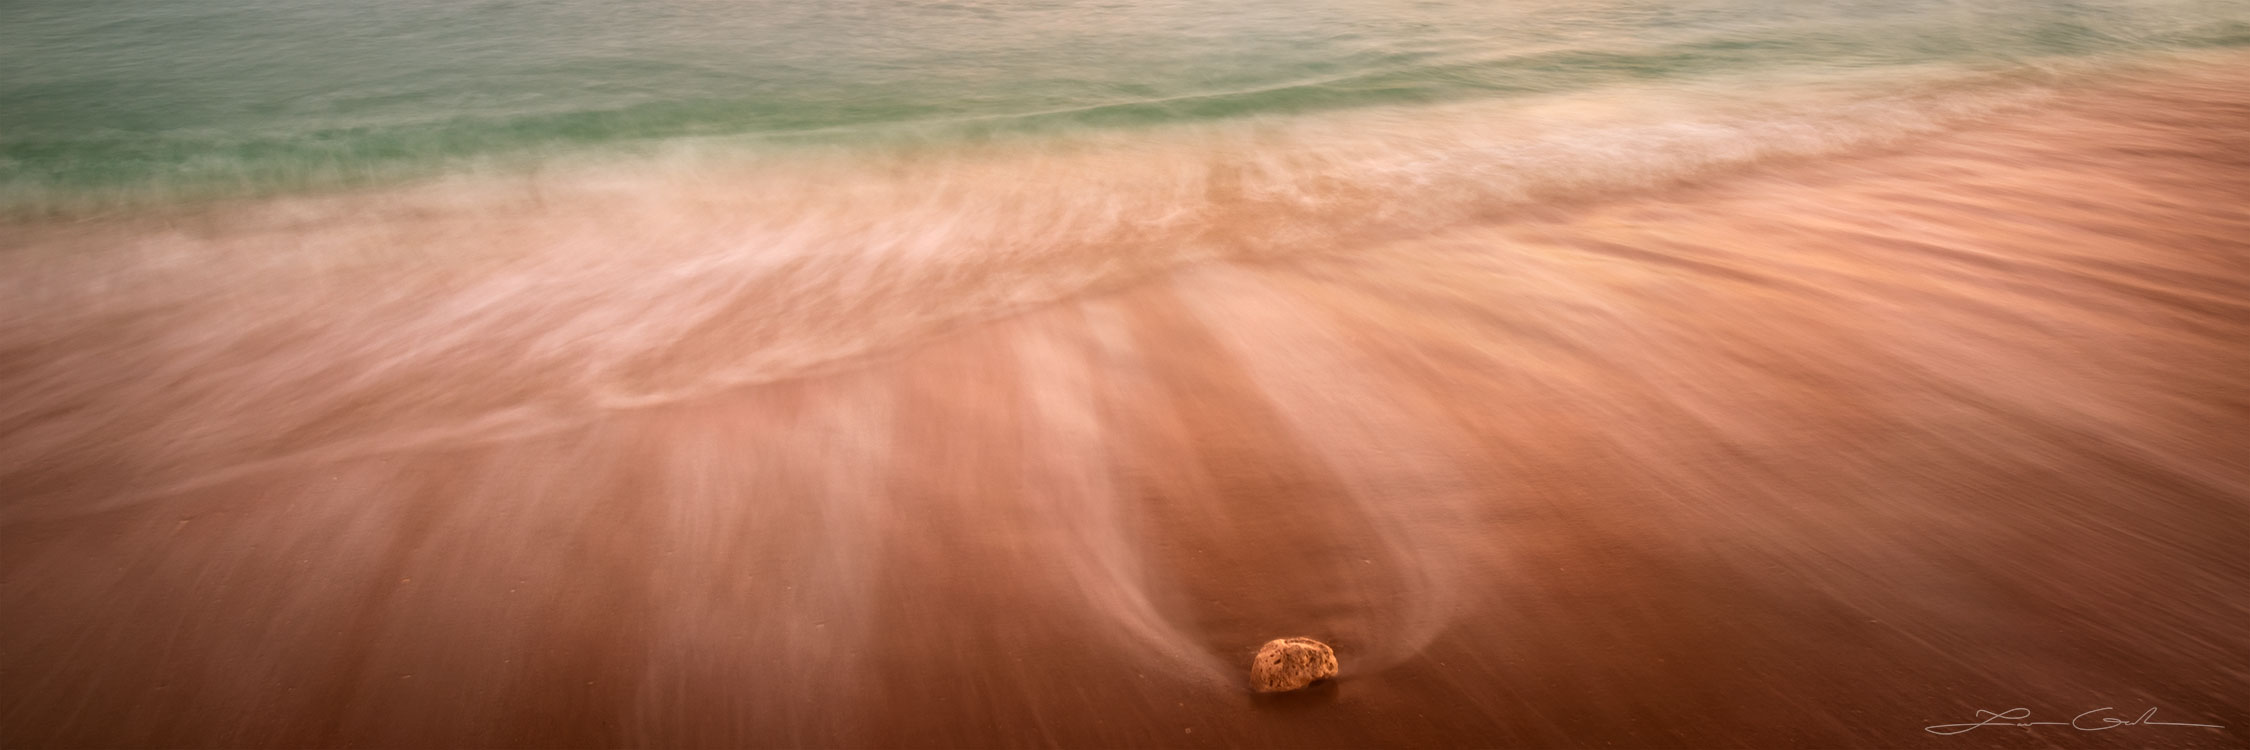 A single rock on a soft sandy shore with a receding wave abstract photograph - Gintchin Fine Art